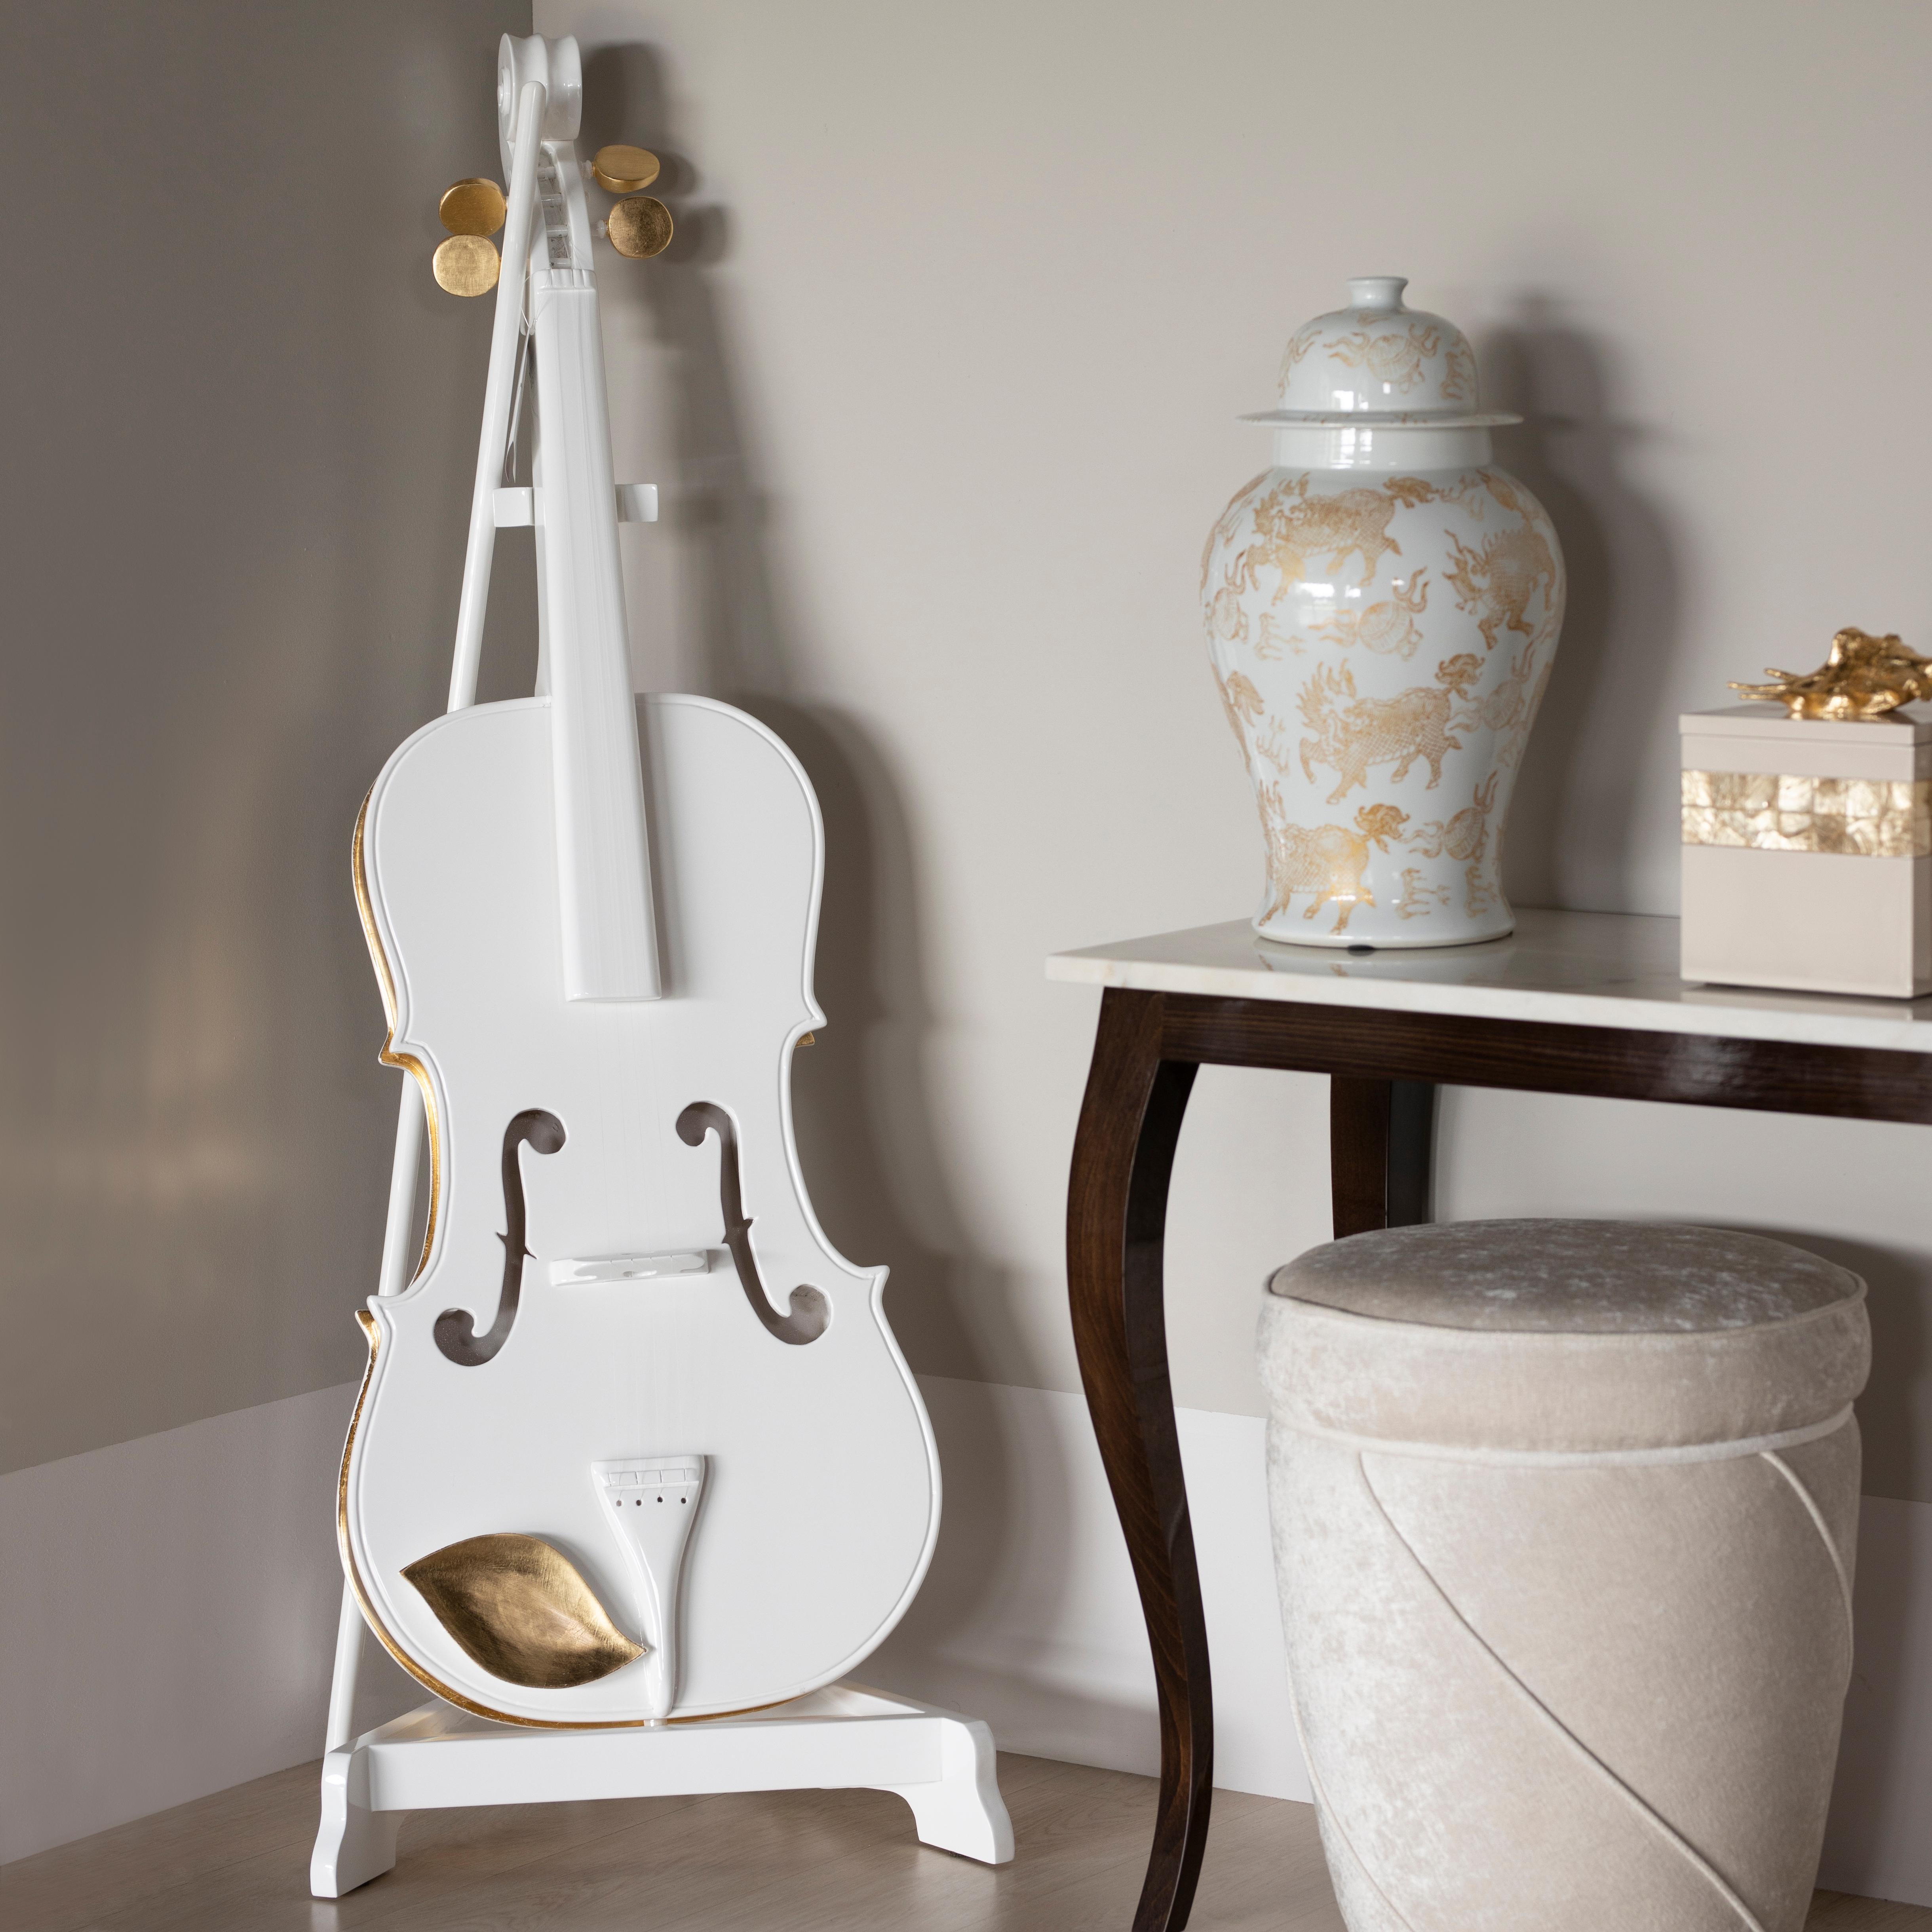 Decorative Brahms Violin, Lusitanus Home Collection, Handcrafted in Portugal - Europe by Lusitanus Home.

Brahms was designed to enhance luxurious interiors. A decorative violin in high-gloss white lacquer with hand-applied gold leaf details,